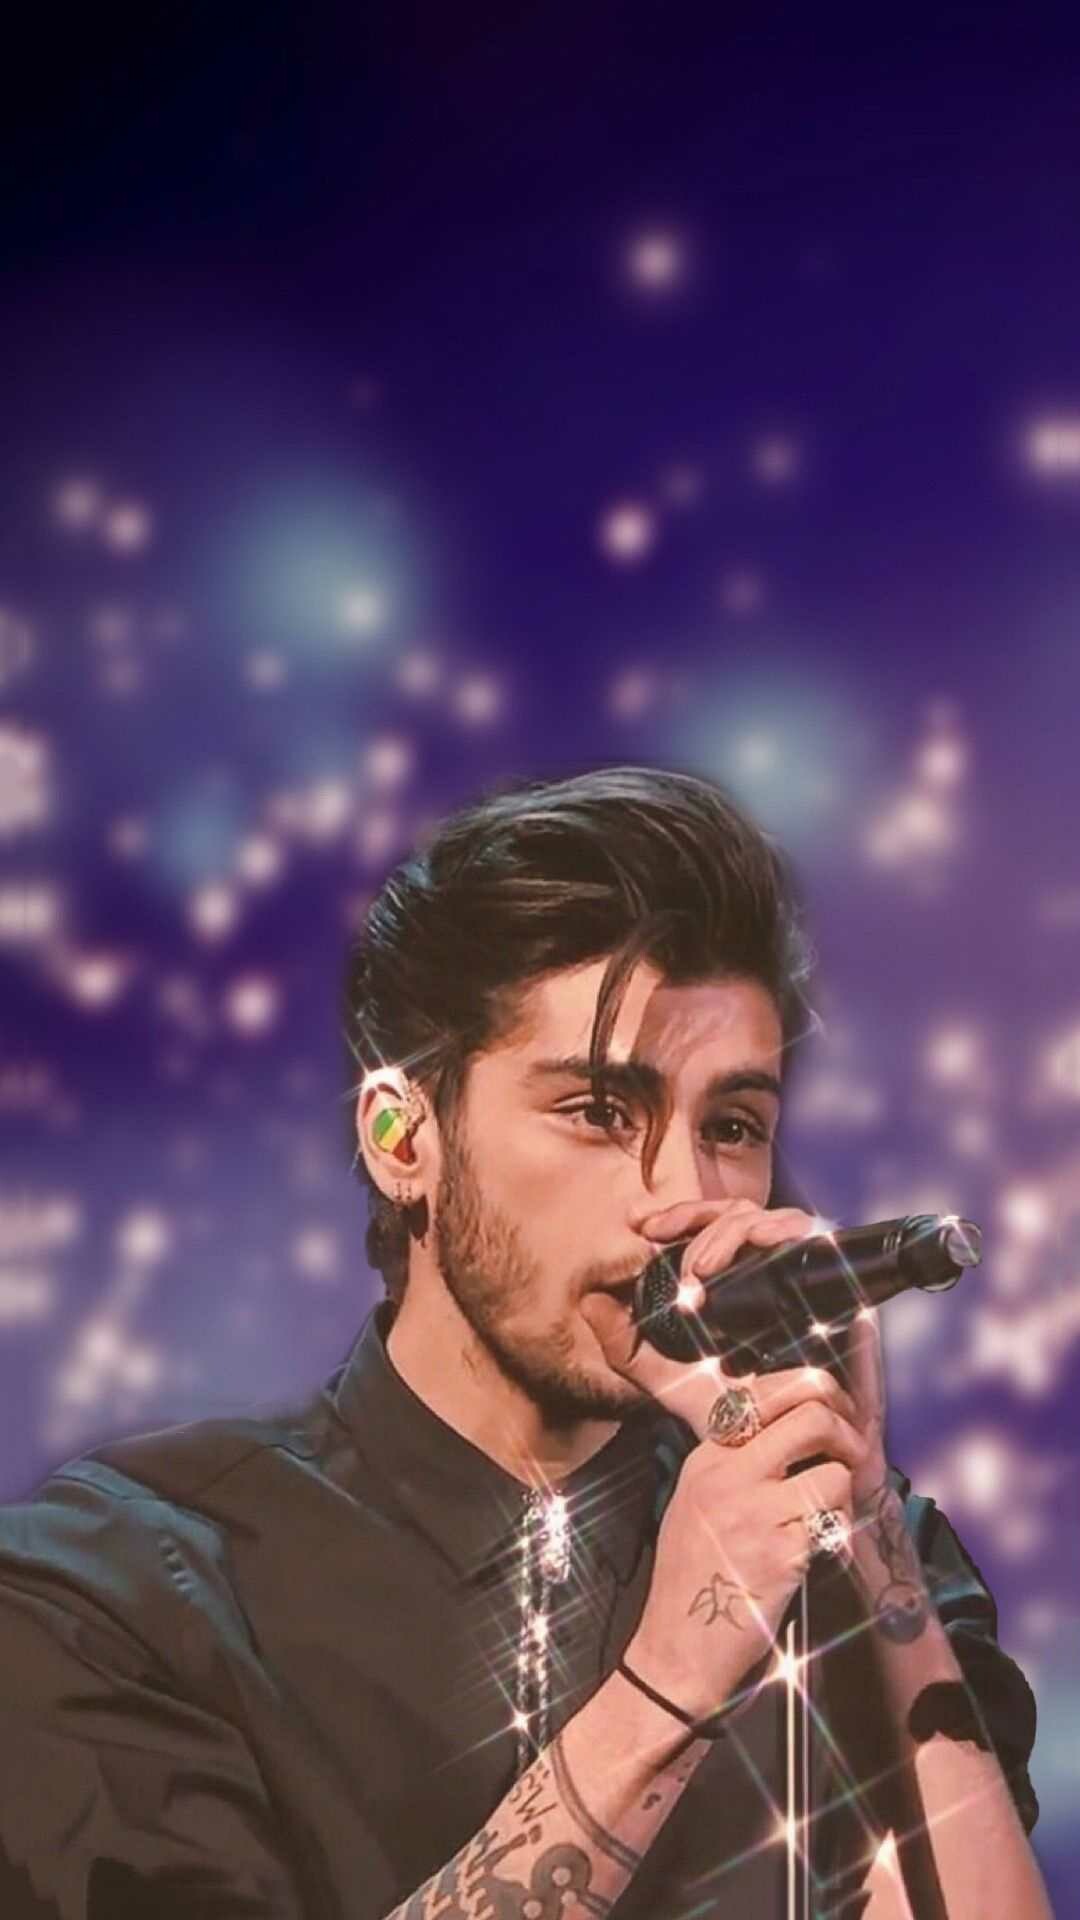 Zayn Malik: "Un Mundo Ideal", performed as a duet with Becky G, was released on 17 May 2019. 1080x1920 Full HD Wallpaper.